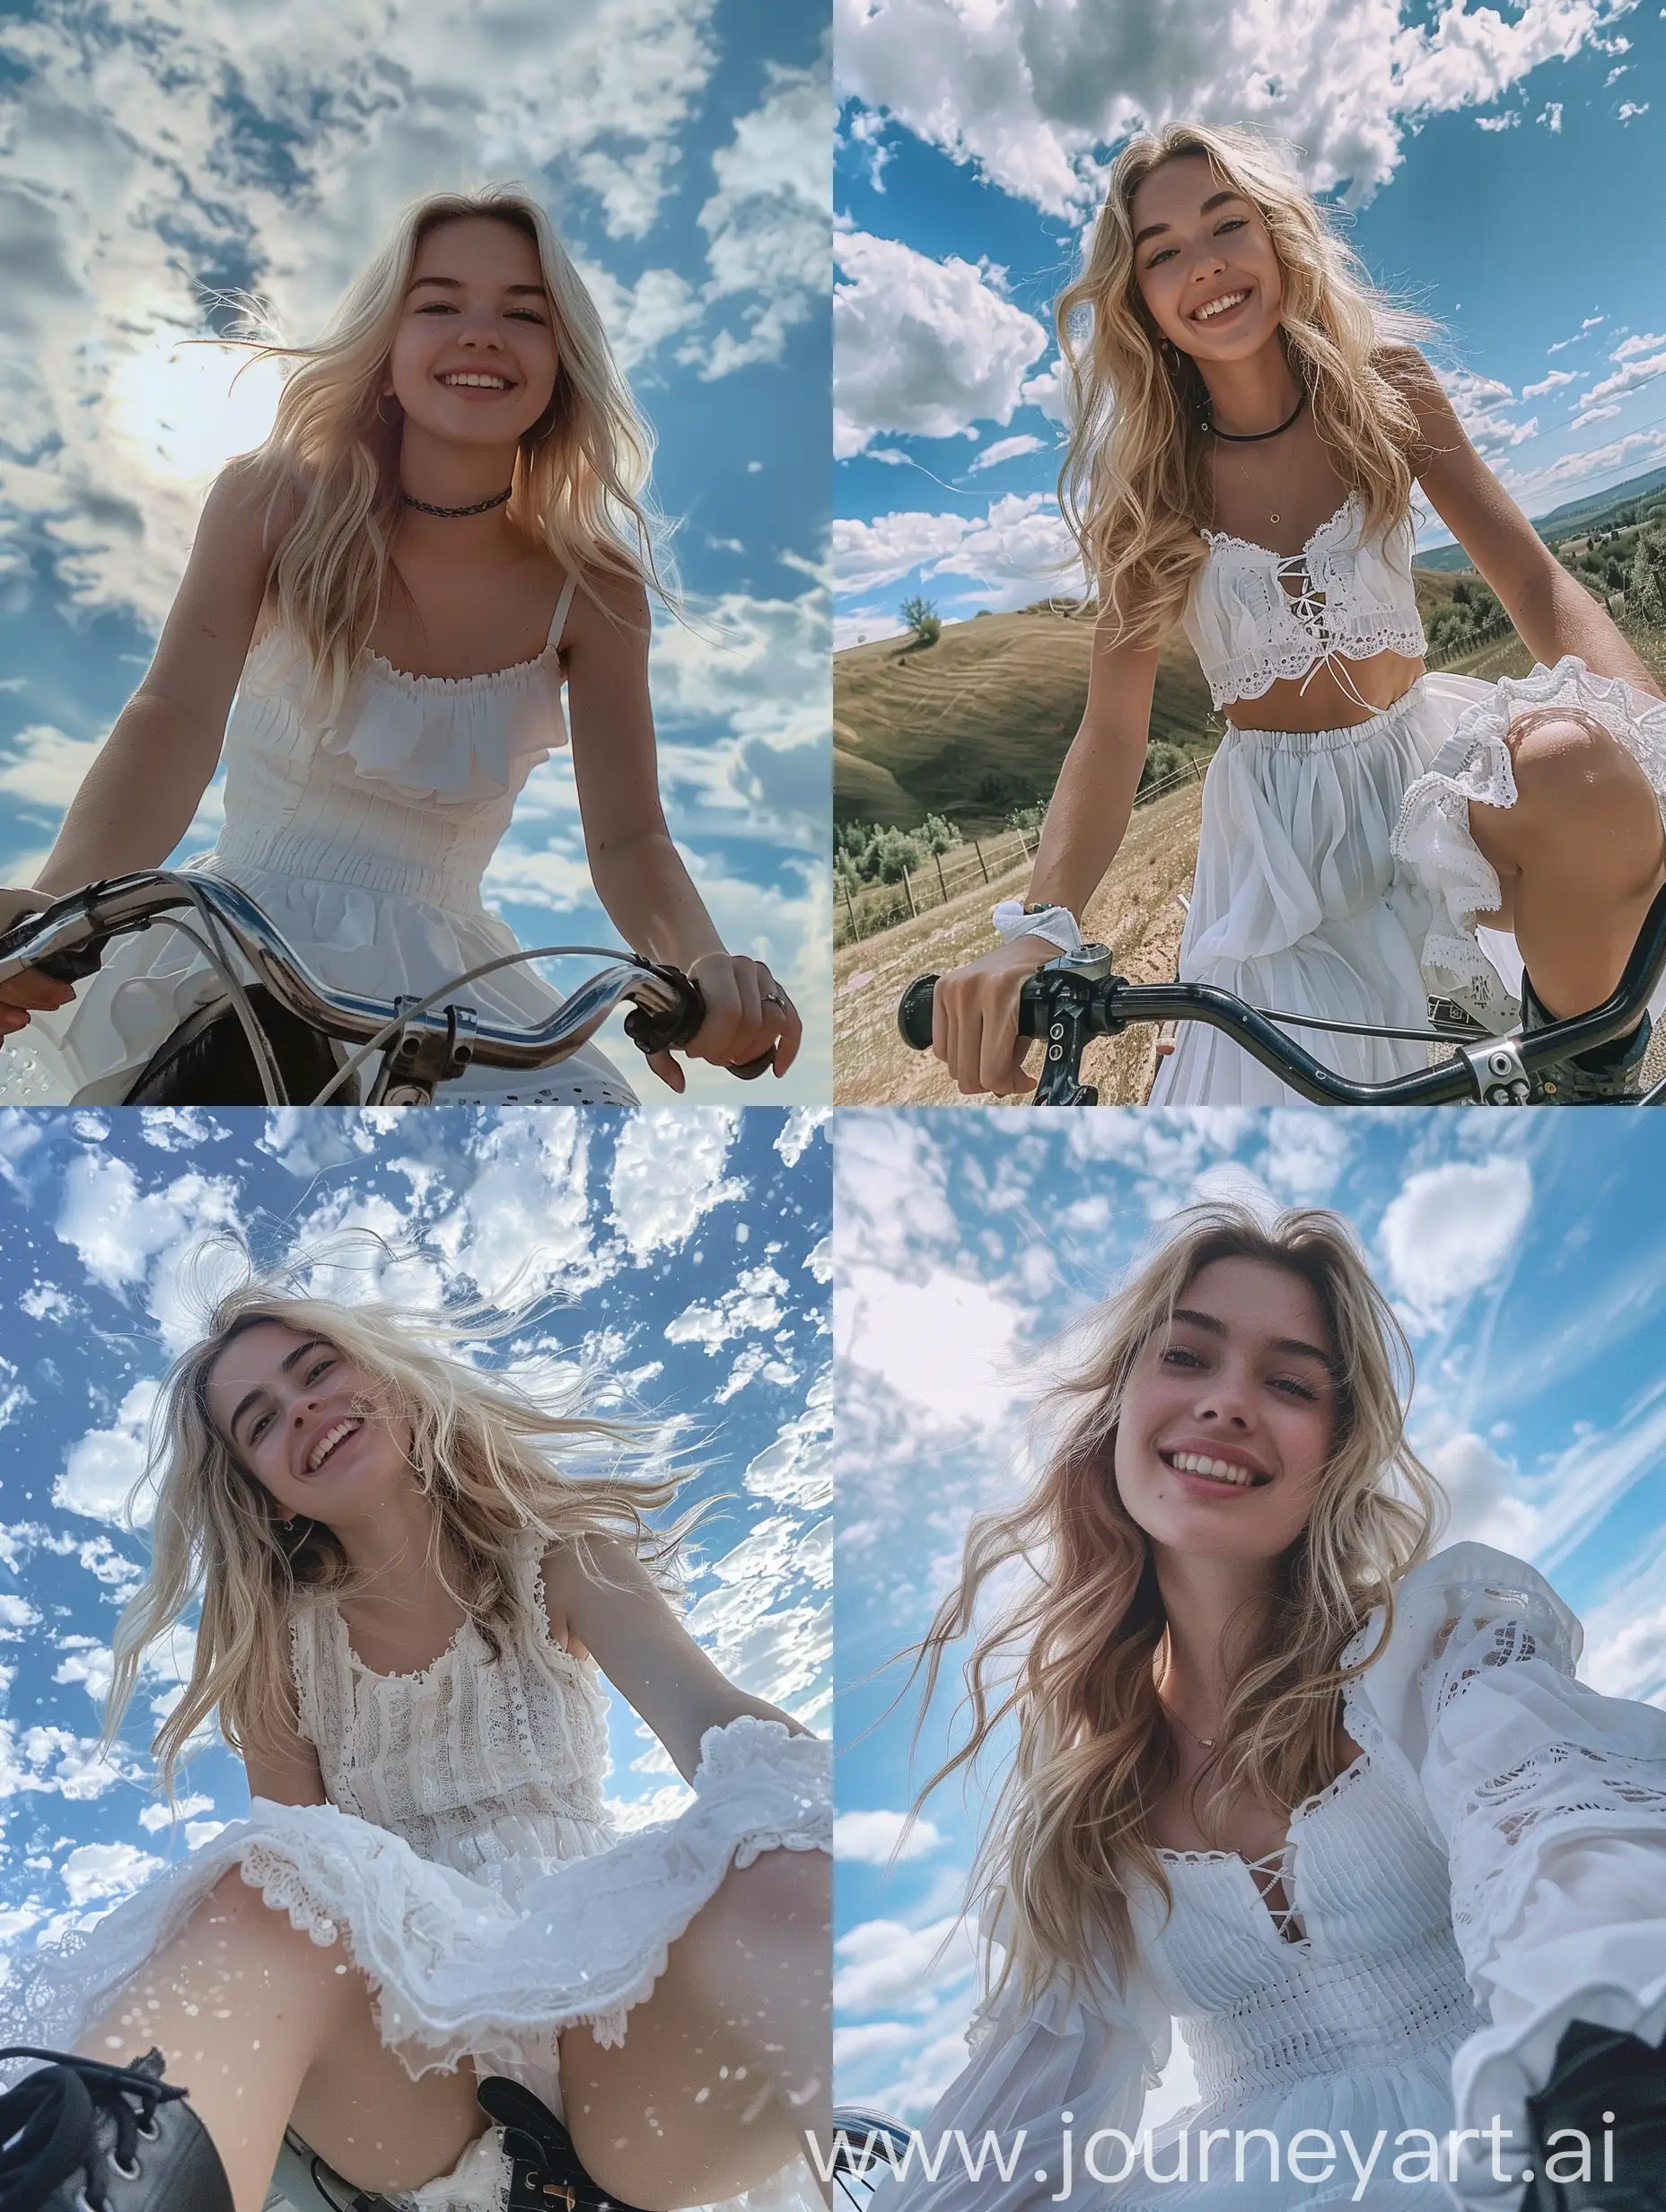 Young-Woman-Riding-Bicycle-and-Taking-Selfie-Under-Blue-Sky